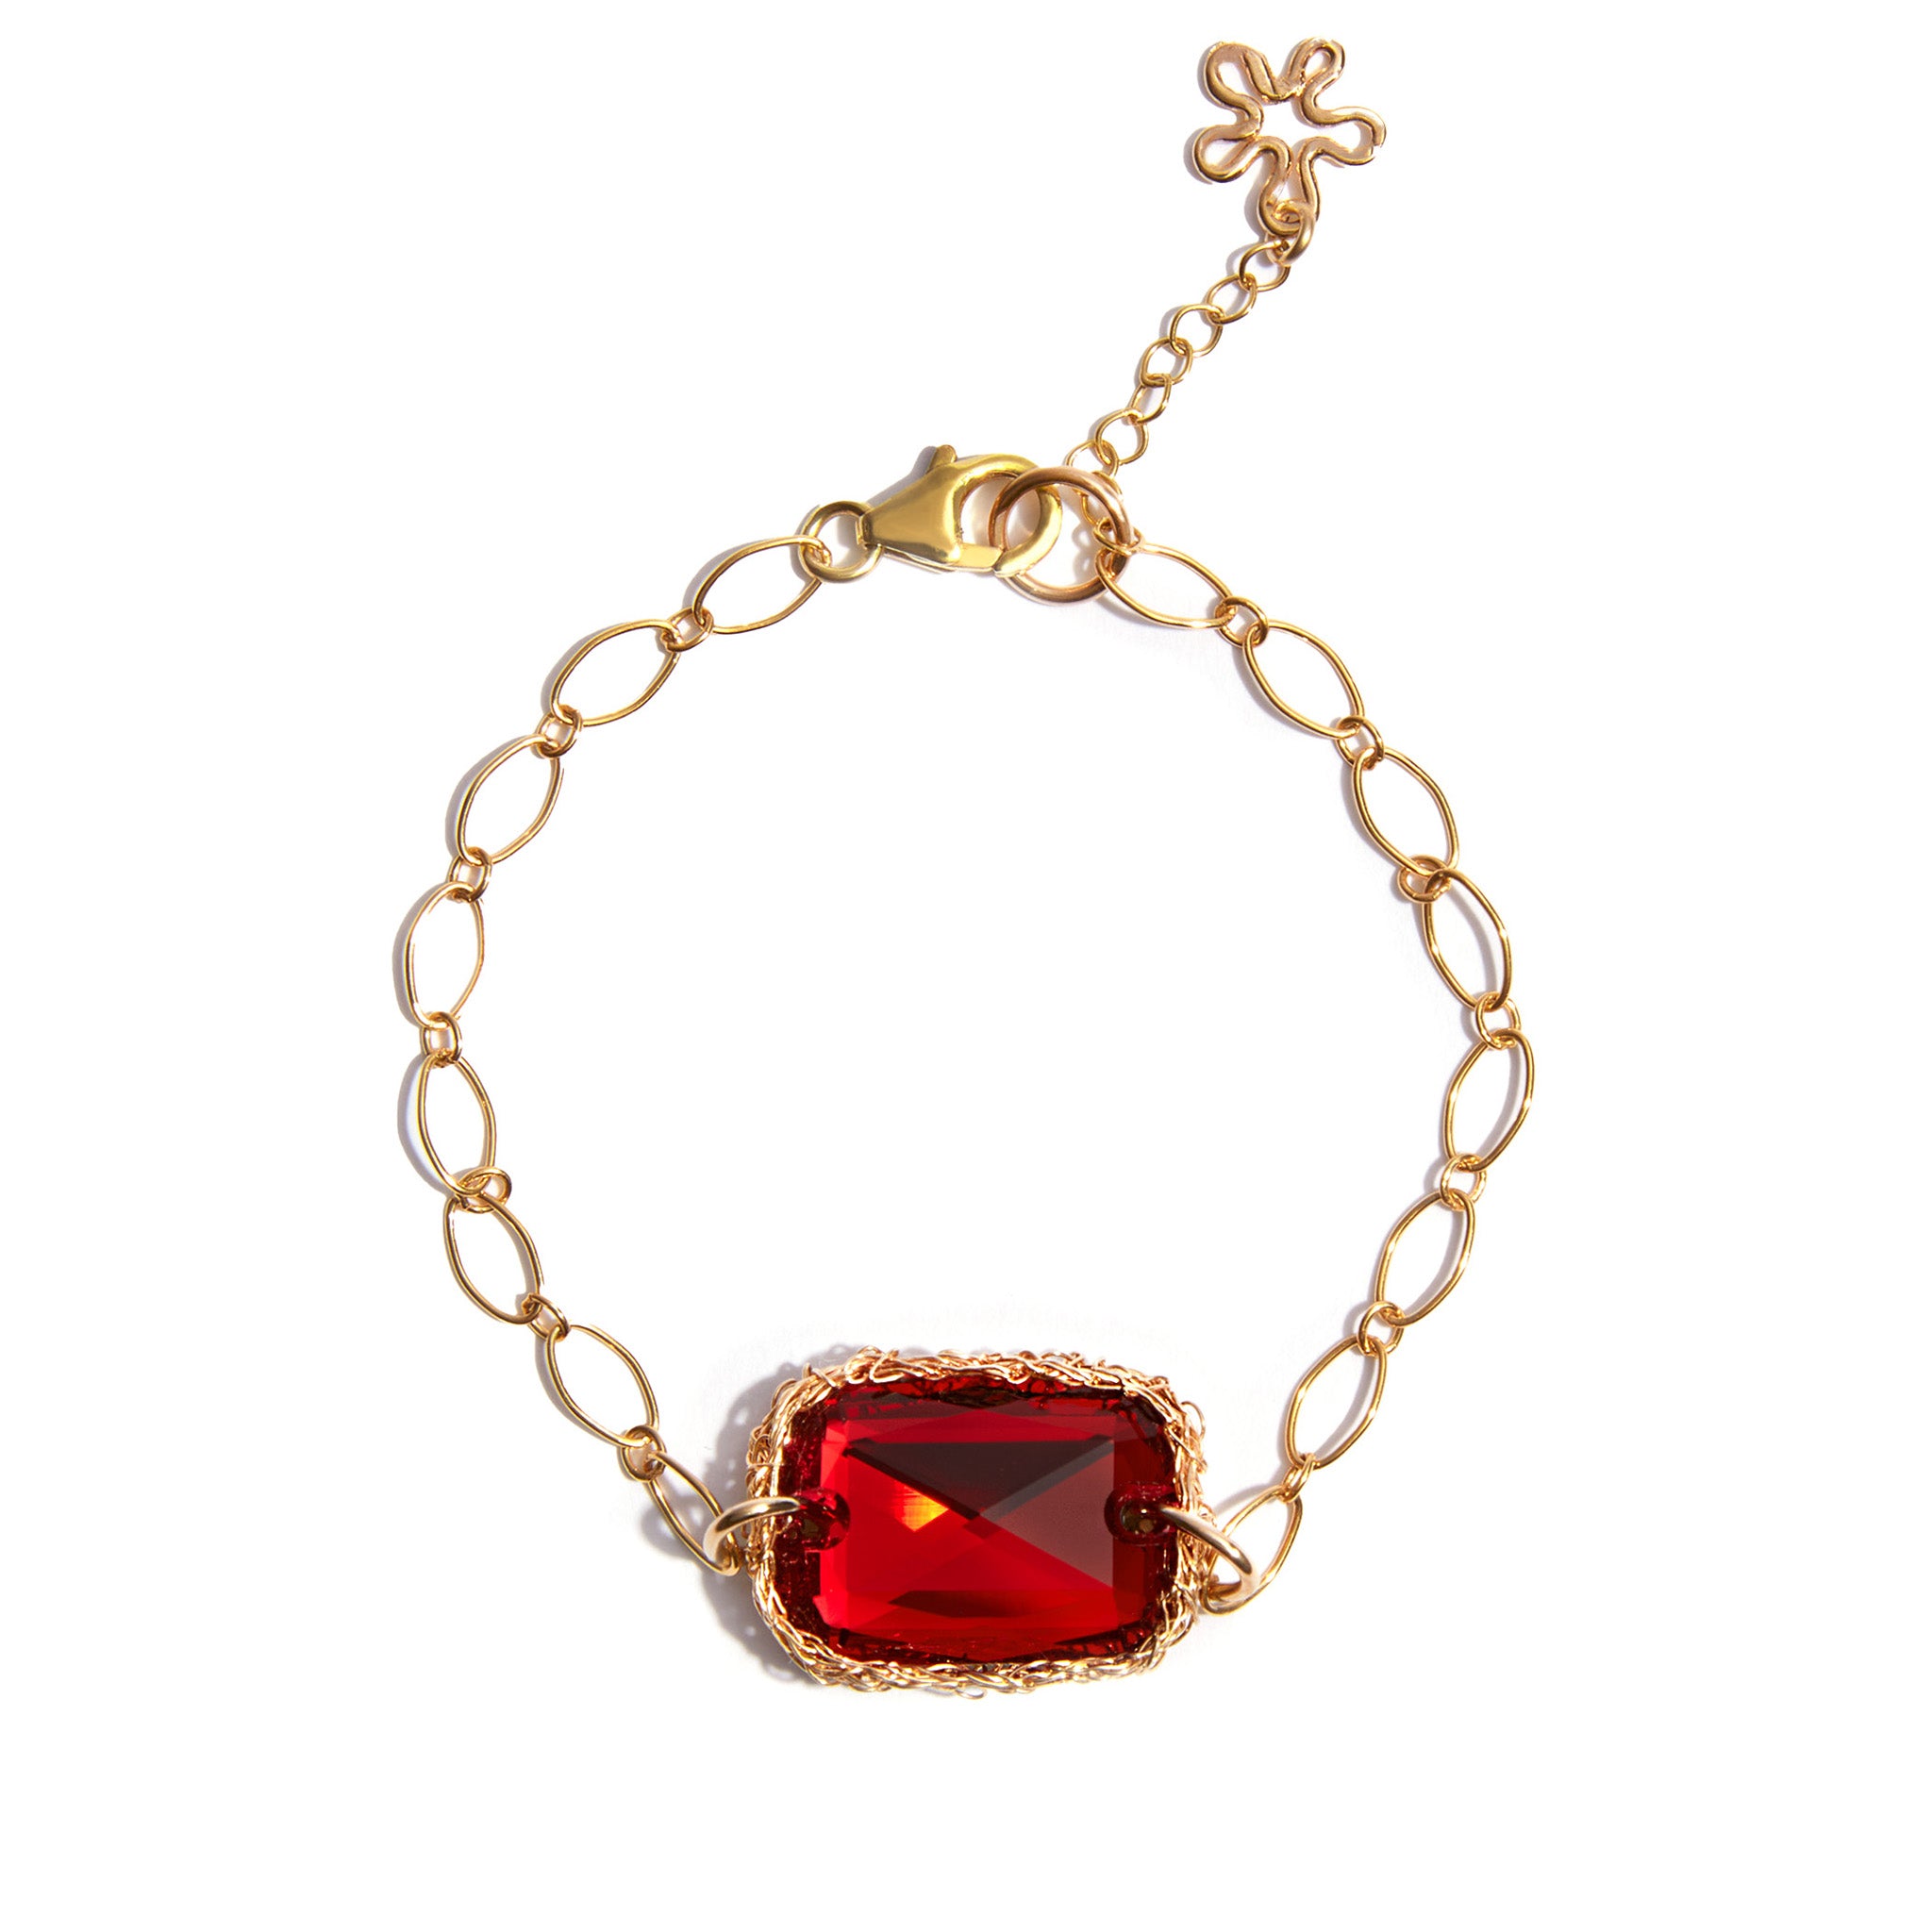 Our classic crochet gold technique is adapted for this gorgeous statement bracelet. A Siam Red gem sits on a large linked chain bracelet complete with an adjustable chain with a flower charm.